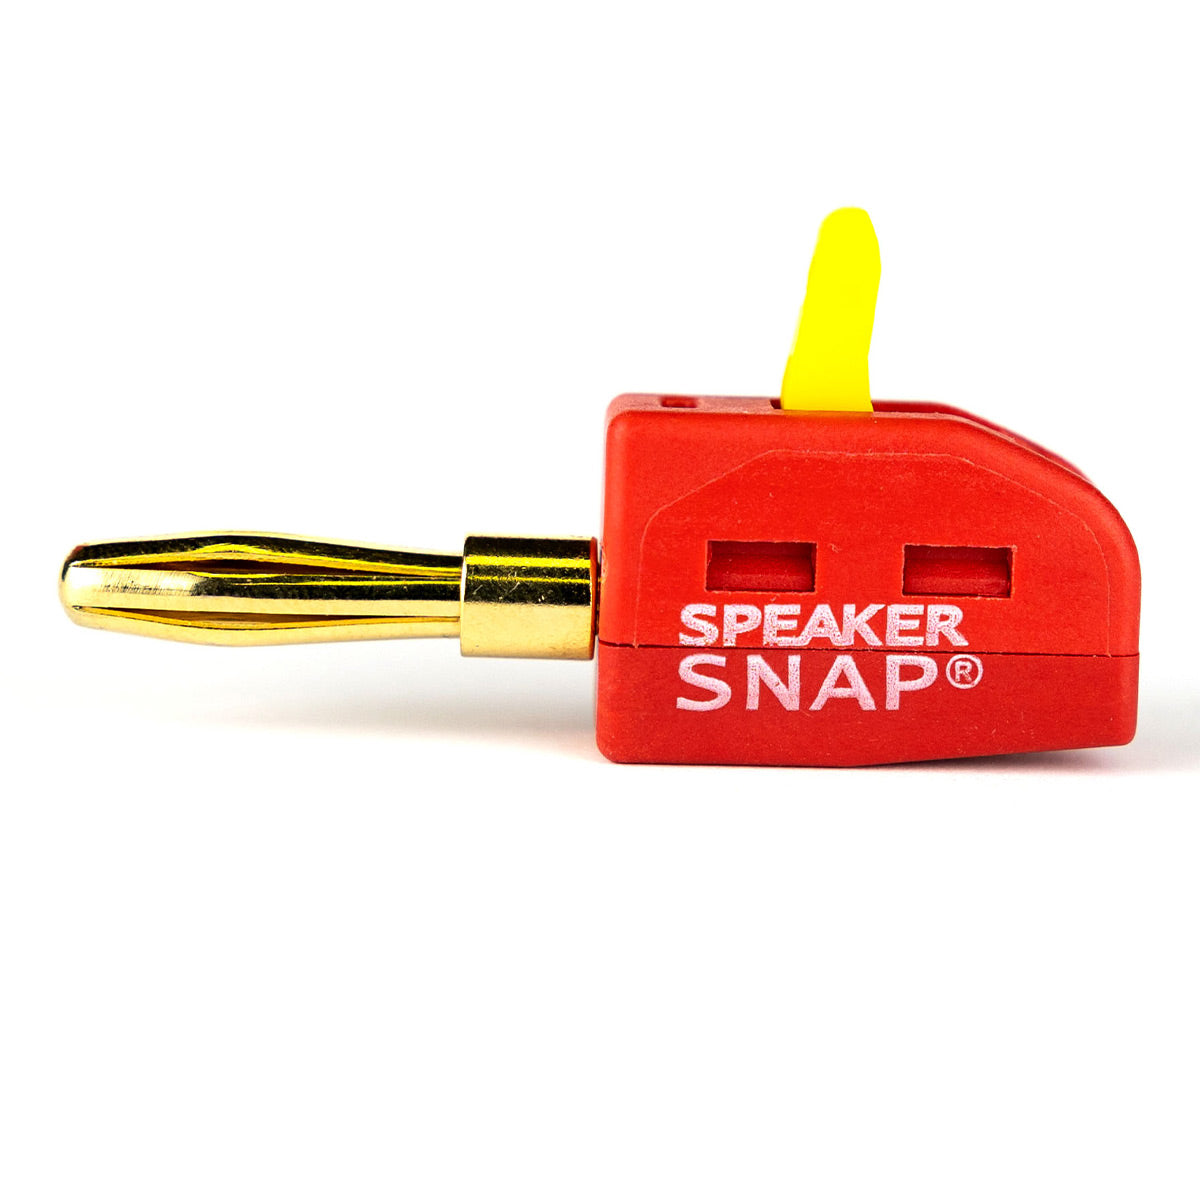 Speaker Snap 50 Count of Fast & Secure Banana Plugs, Gold Plated, 12-24 AWG, for Home Theaters, Speaker Wire, Wall Plates, and Receivers